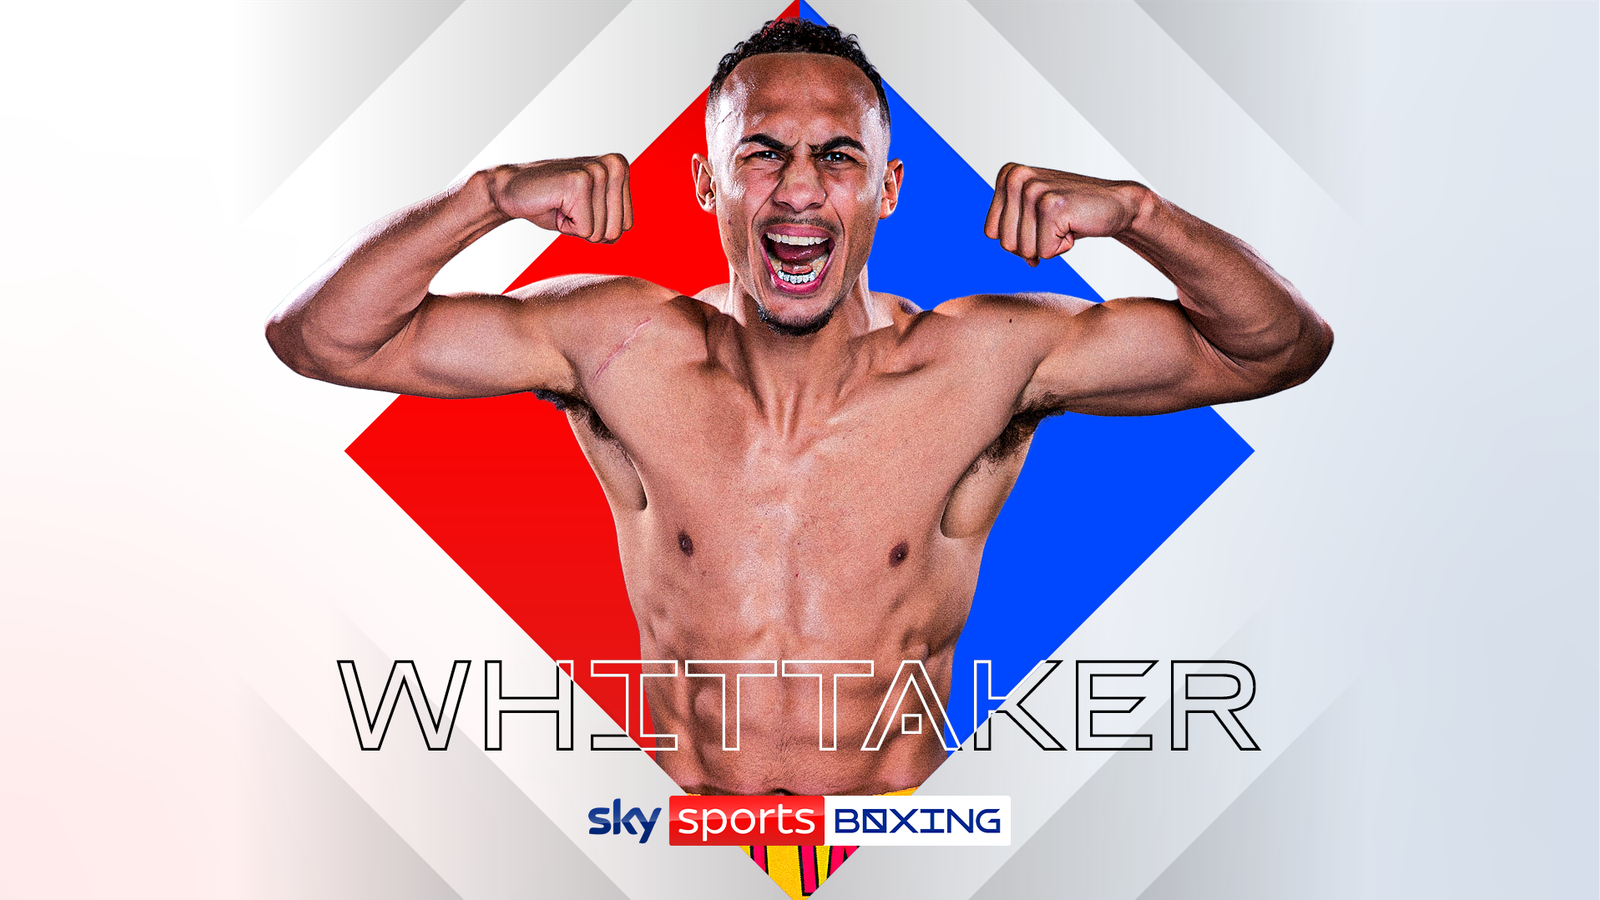 Ben Whittaker to make professional debut on Hughie Fury vs Michael Hunter undercard in Manchester